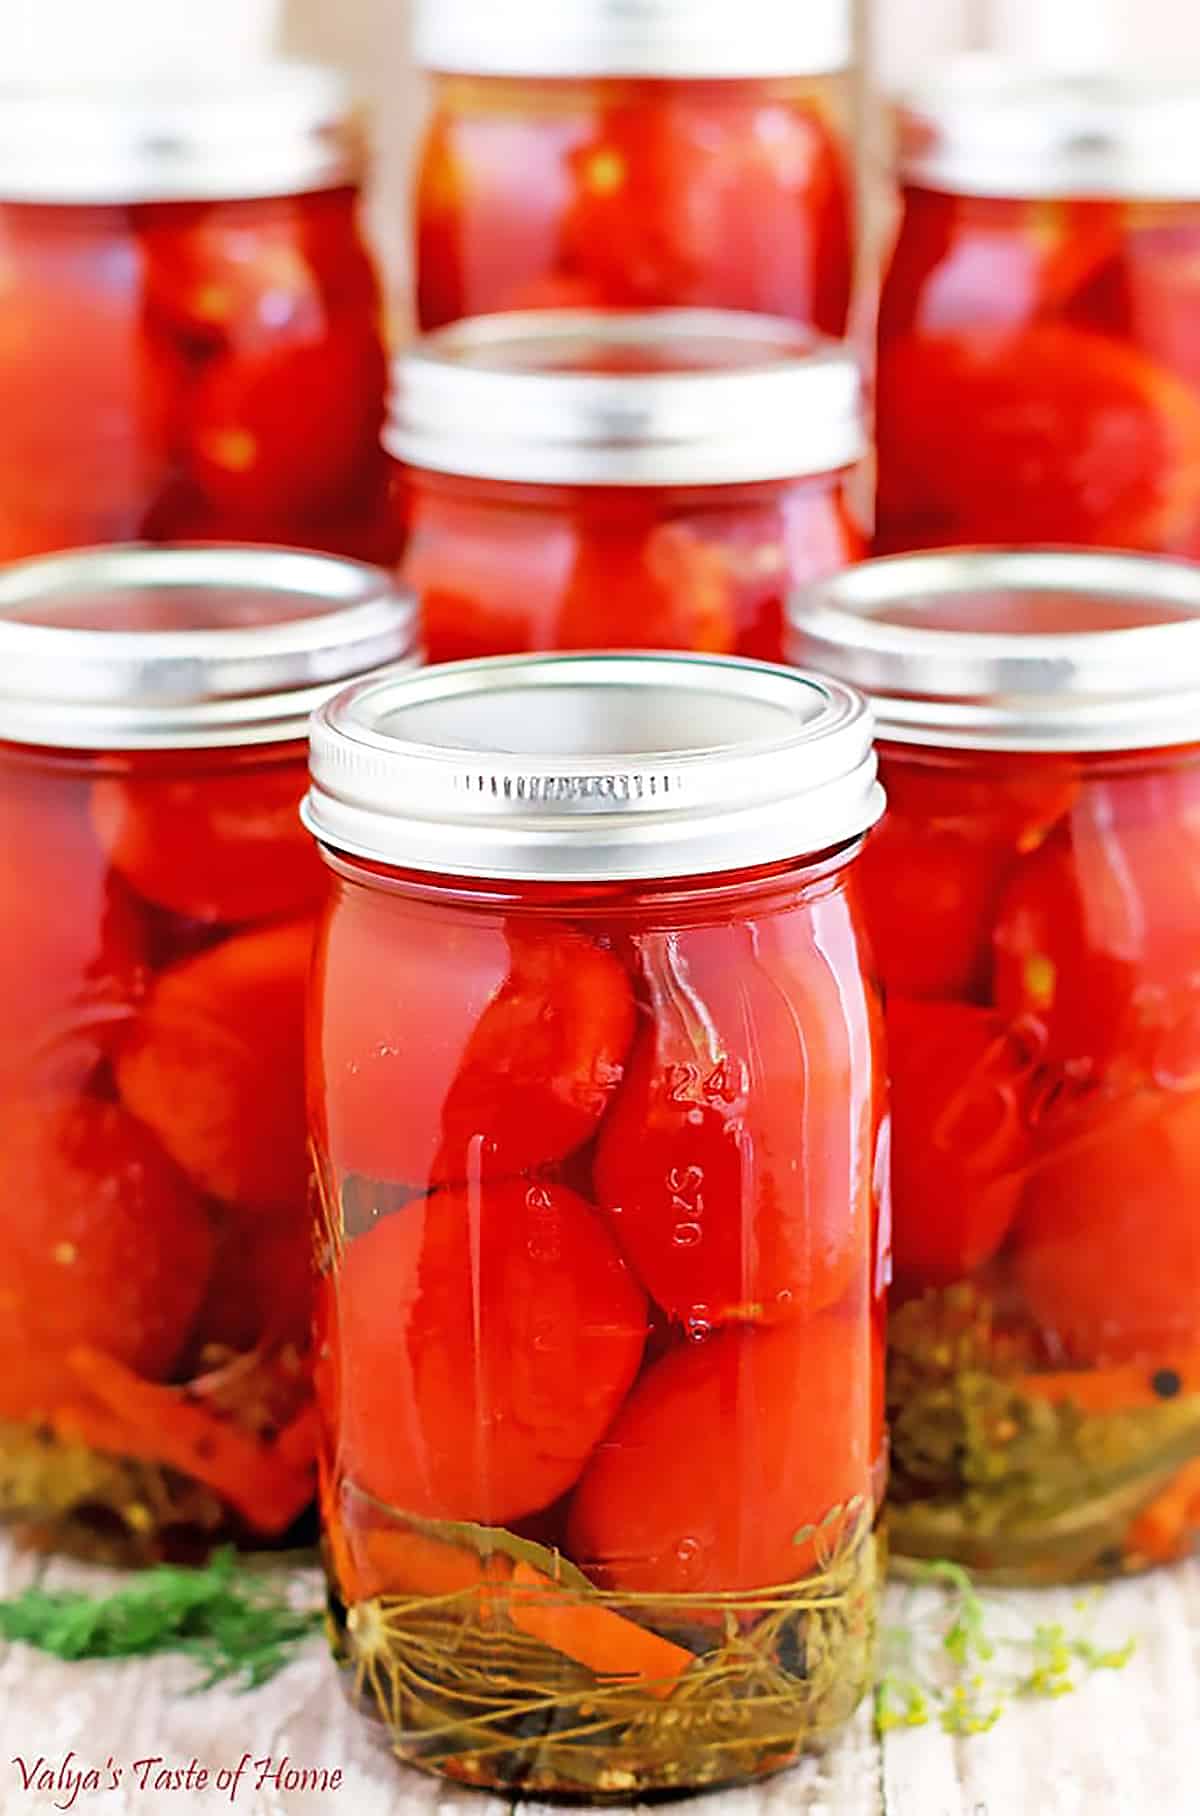 I grew up canning fruits and vegetables with my mom and still enjoy doing it to this day. I’ve tried a few different blends in the past. This particular Canned Tomatoes Recipe is my aunt Lyuda’s, and the one that takes the number one spot for me.